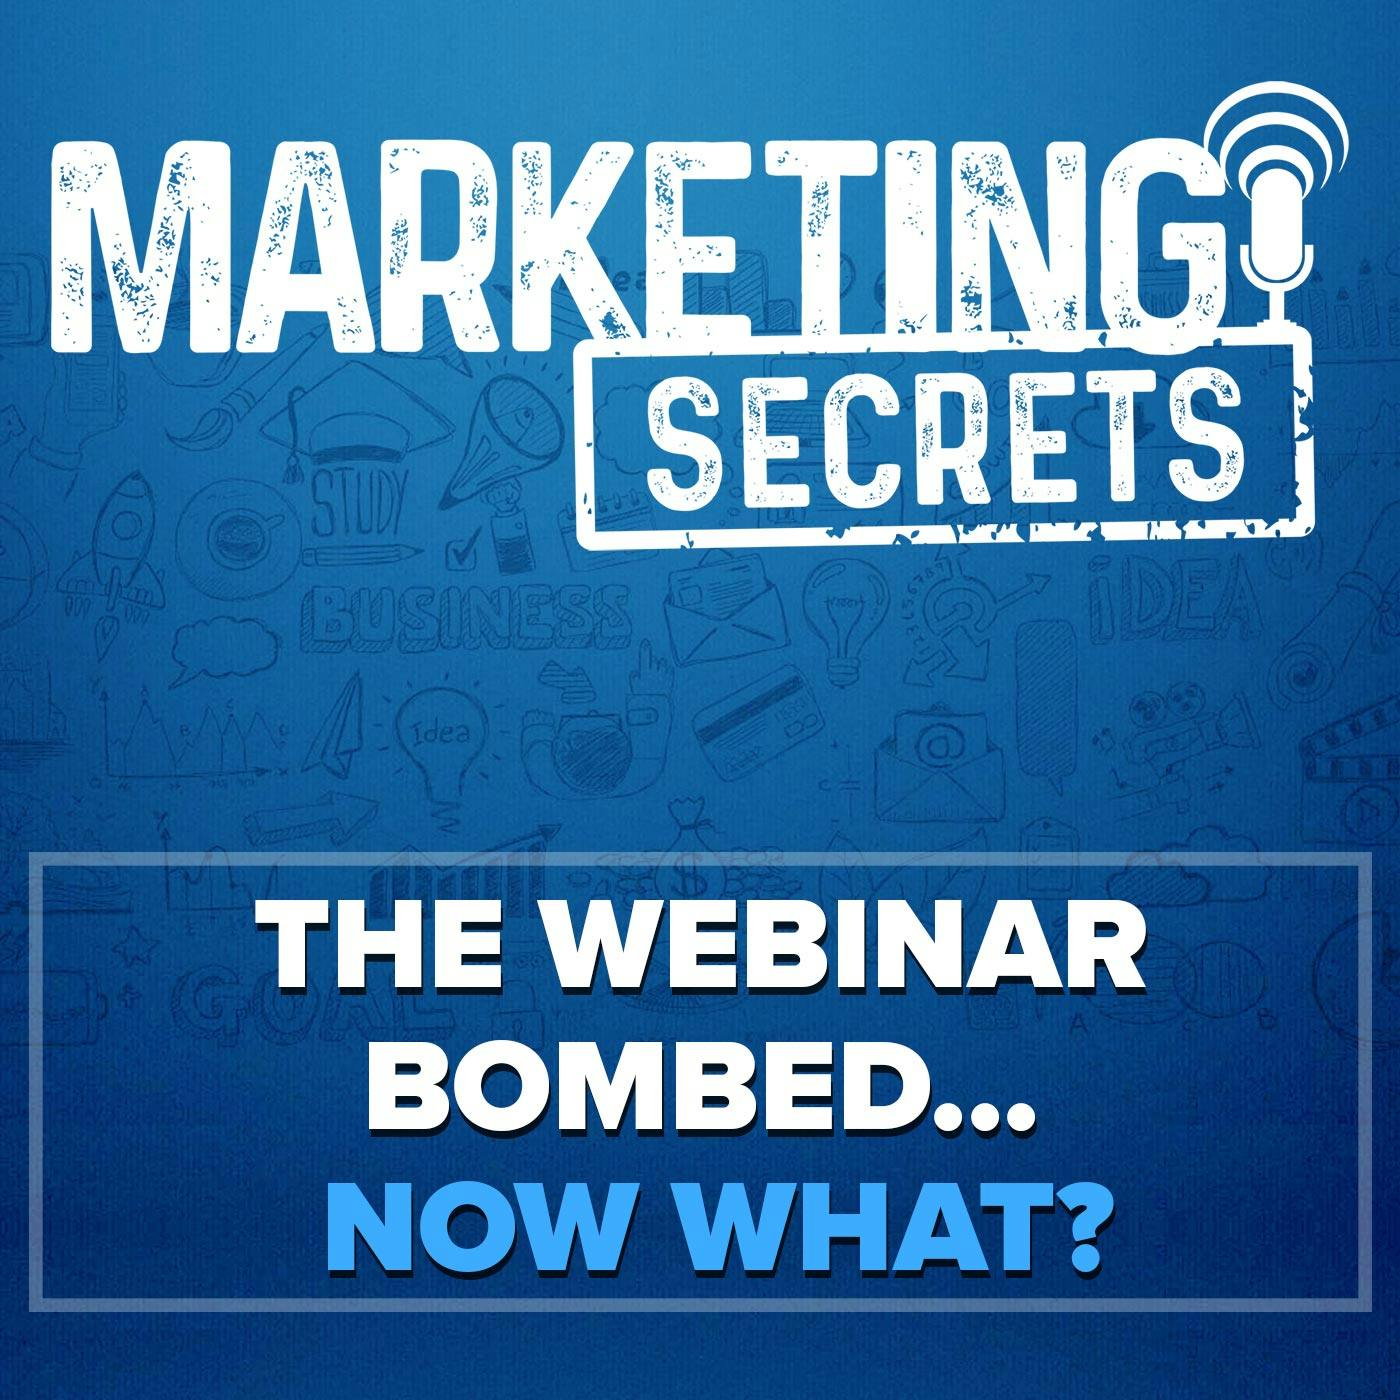 The Webinar Bombed... Now What?